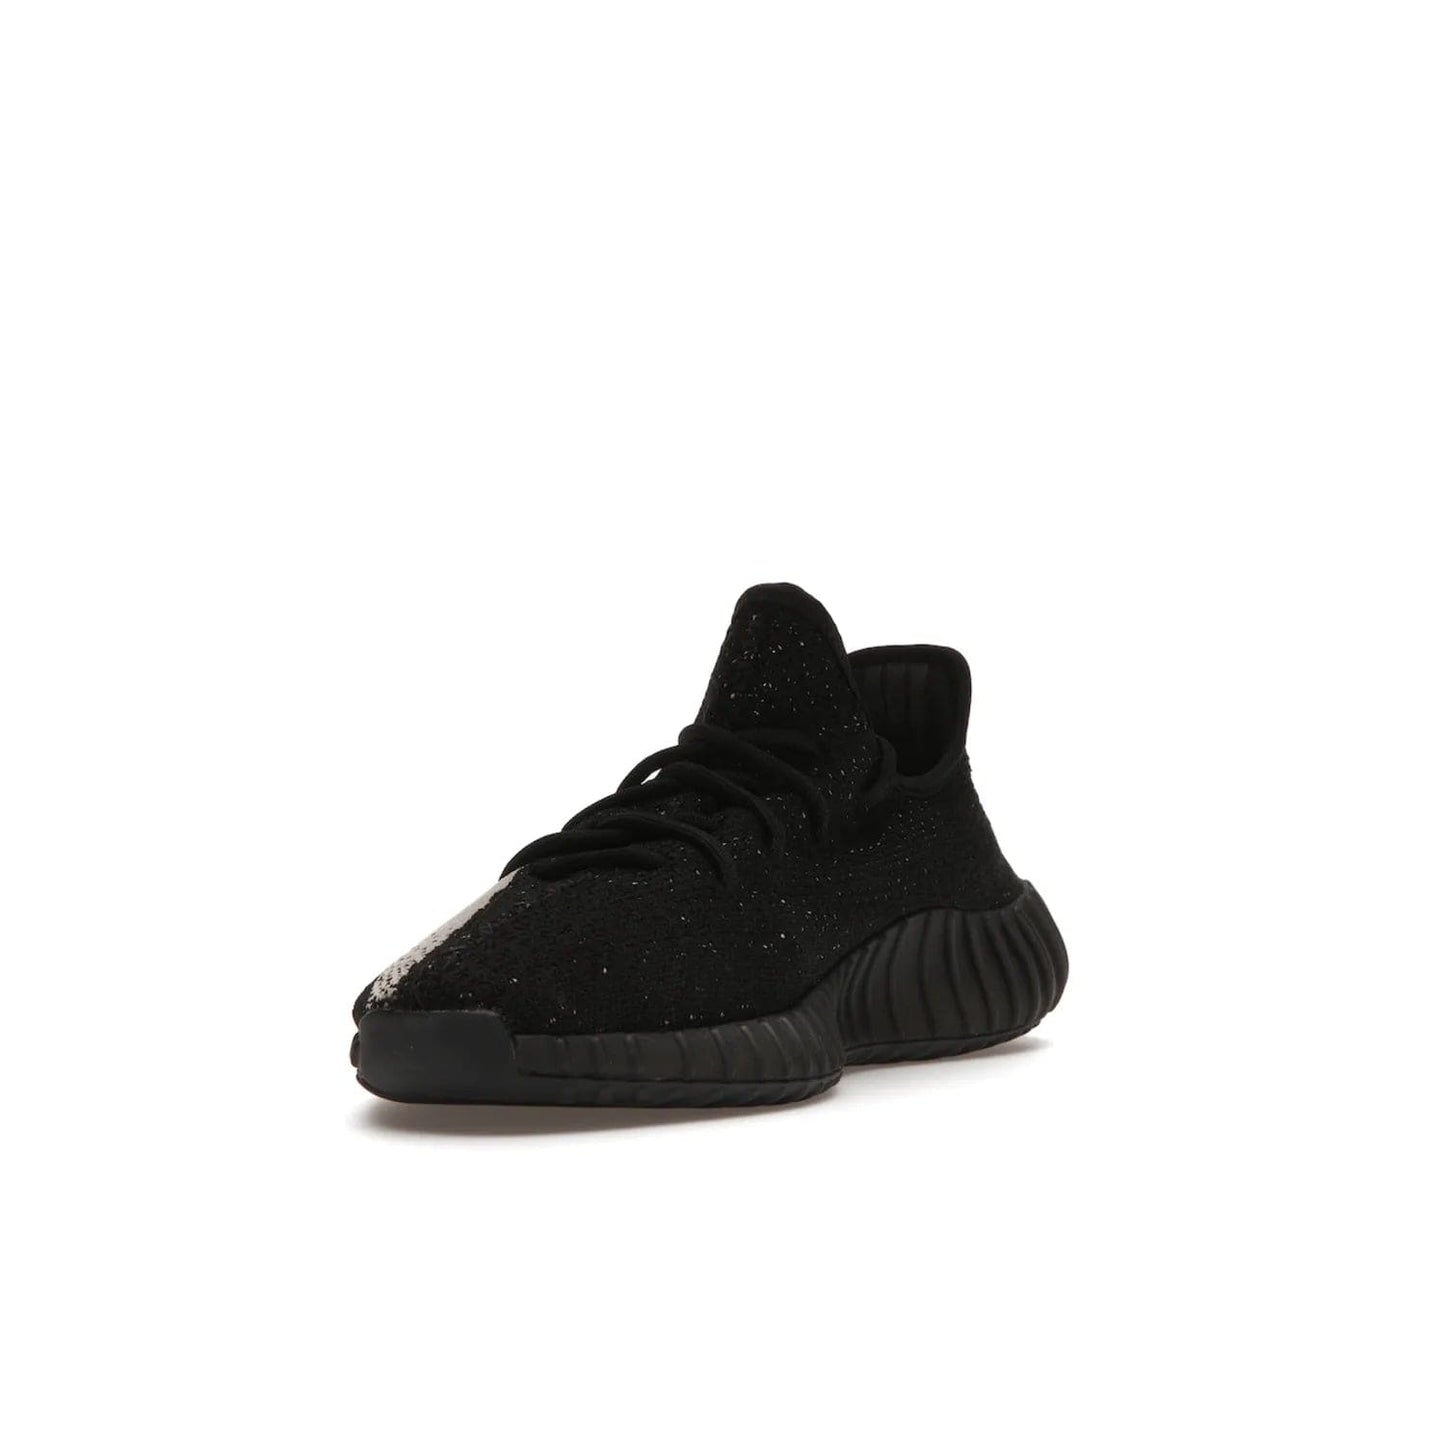 adidas Yeezy Boost 350 V2 Core Black White (2016/2022) - Image 13 - Only at www.BallersClubKickz.com - Stylish adidas Yeezy Boost 350 V2 in classic black with white "SPLY-350" stitched to the side stripe. Features Primeknit upper & Boost sole for comfort. Restock in March 2022.